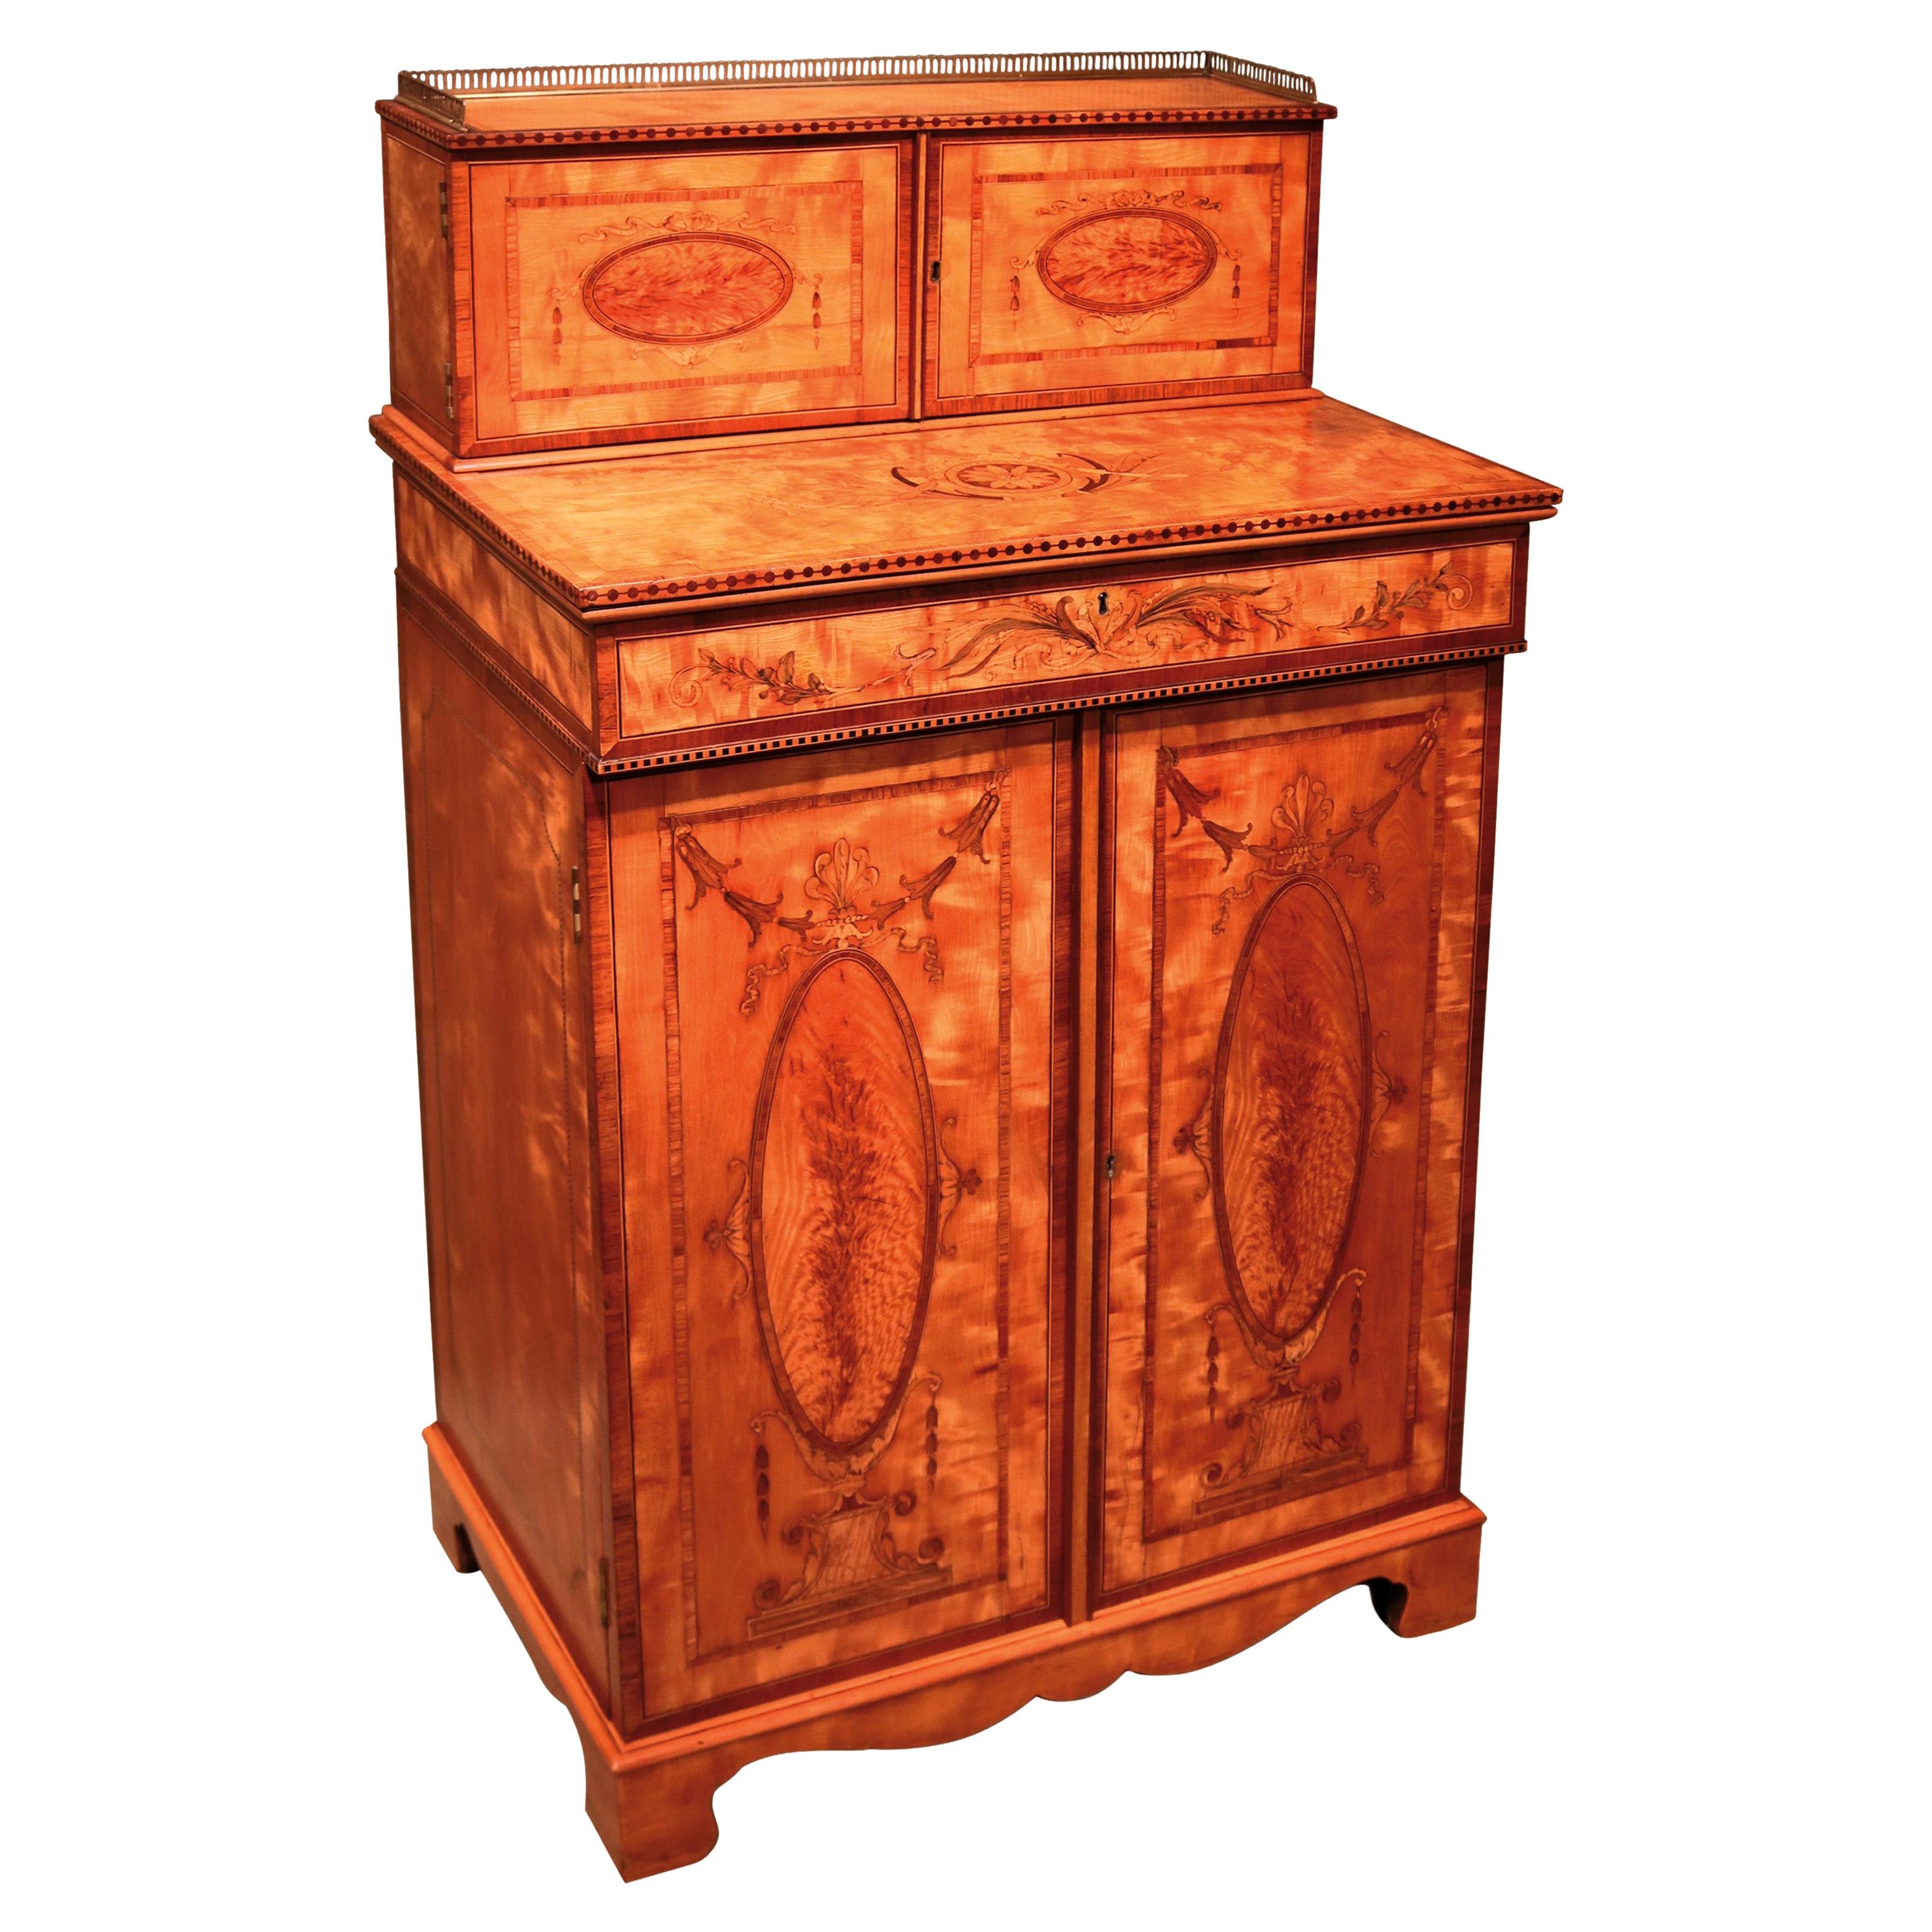 Fine Quality 18th Century Satinwood Collector’s Cabinet